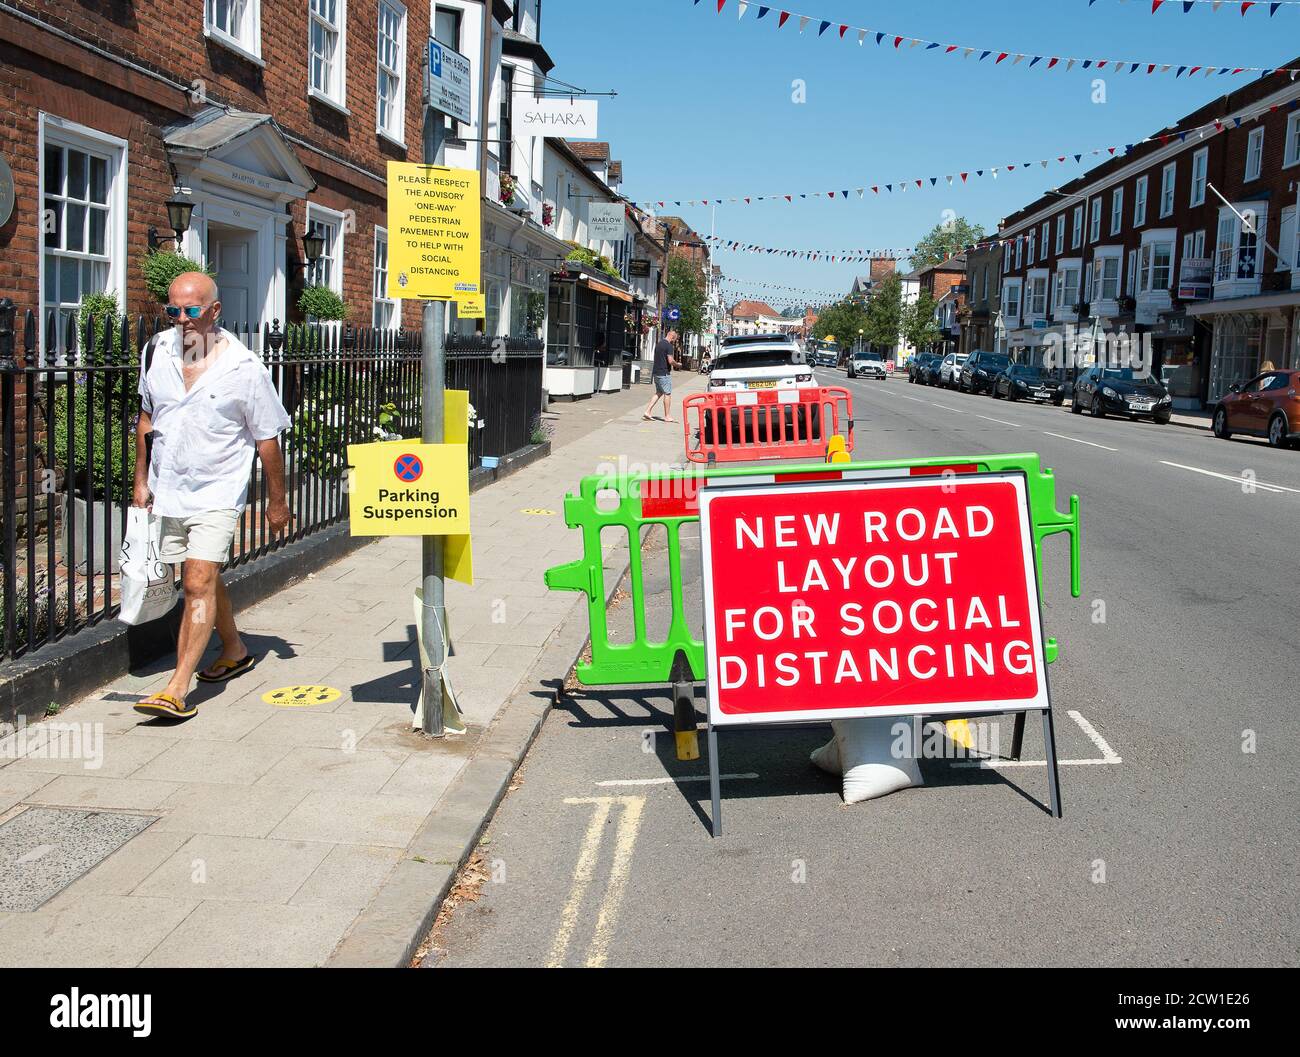 Marlow, Buckinghamshire, UK. 25th June, 2020. A new road layout sign for social distancing in Marlow High Street which remains quieter than normal even though many of the shops have now reopened for business following the easing of the Coronavirus Covid-19 Pandemic lockdown rules. Credit: Maureen McLean/Alamy Stock Photo